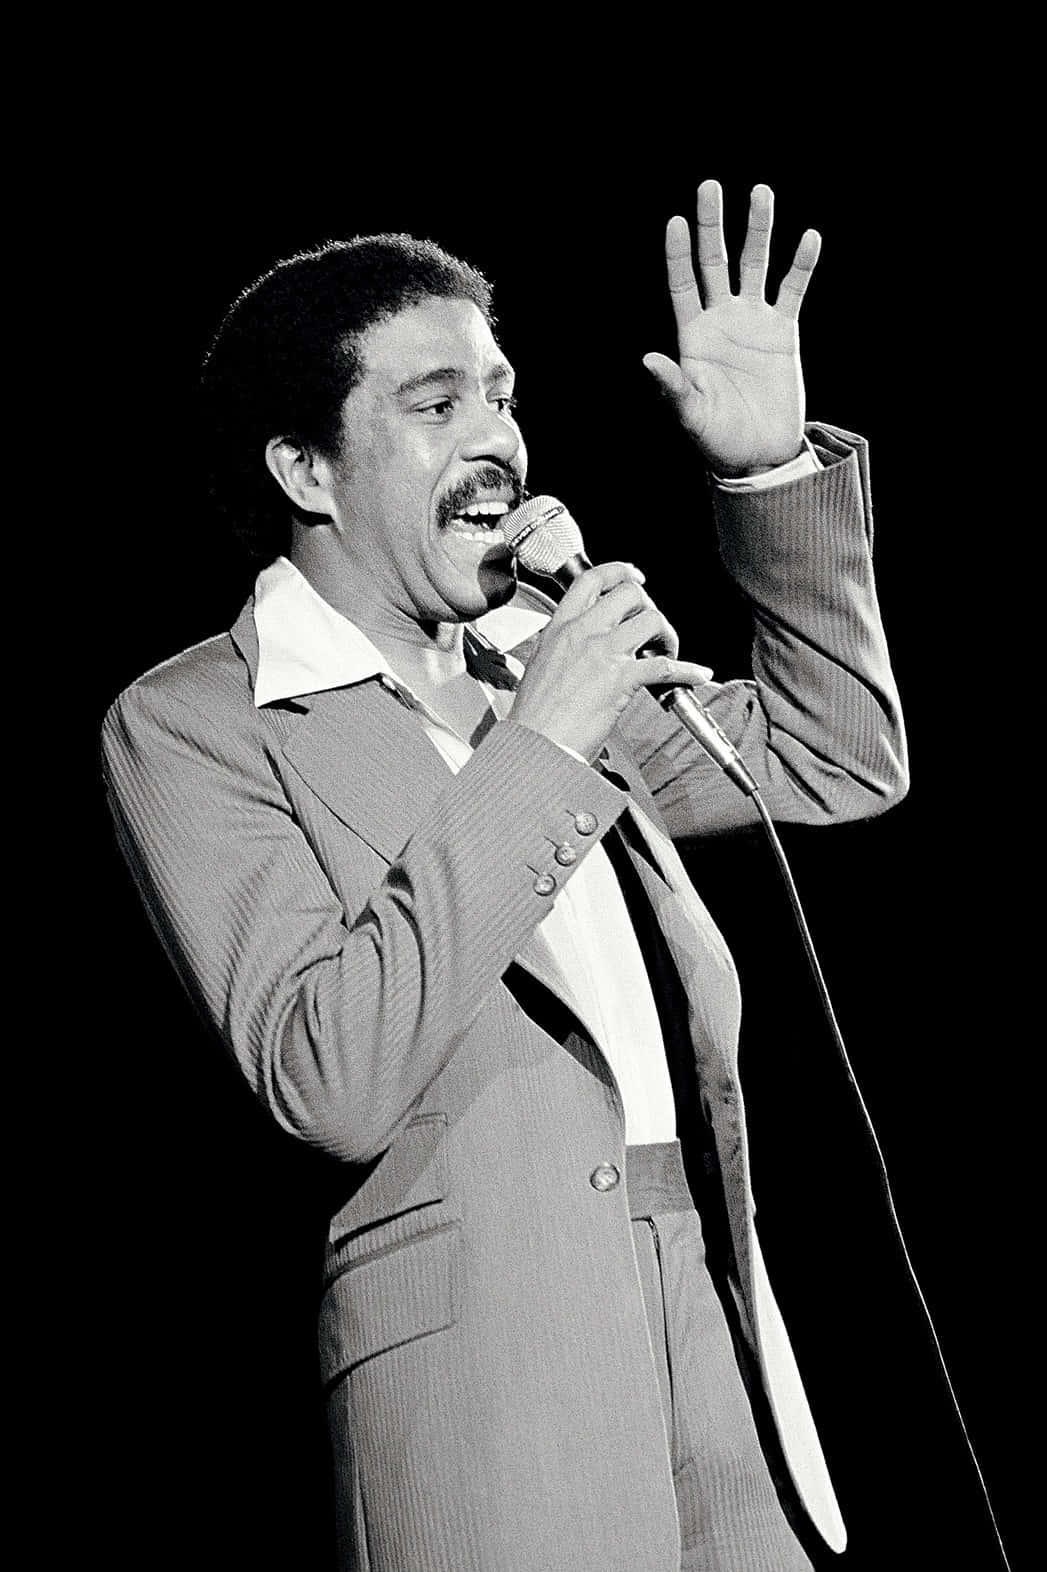 Richard Pryor on Stage - The Light of Comedy Wallpaper